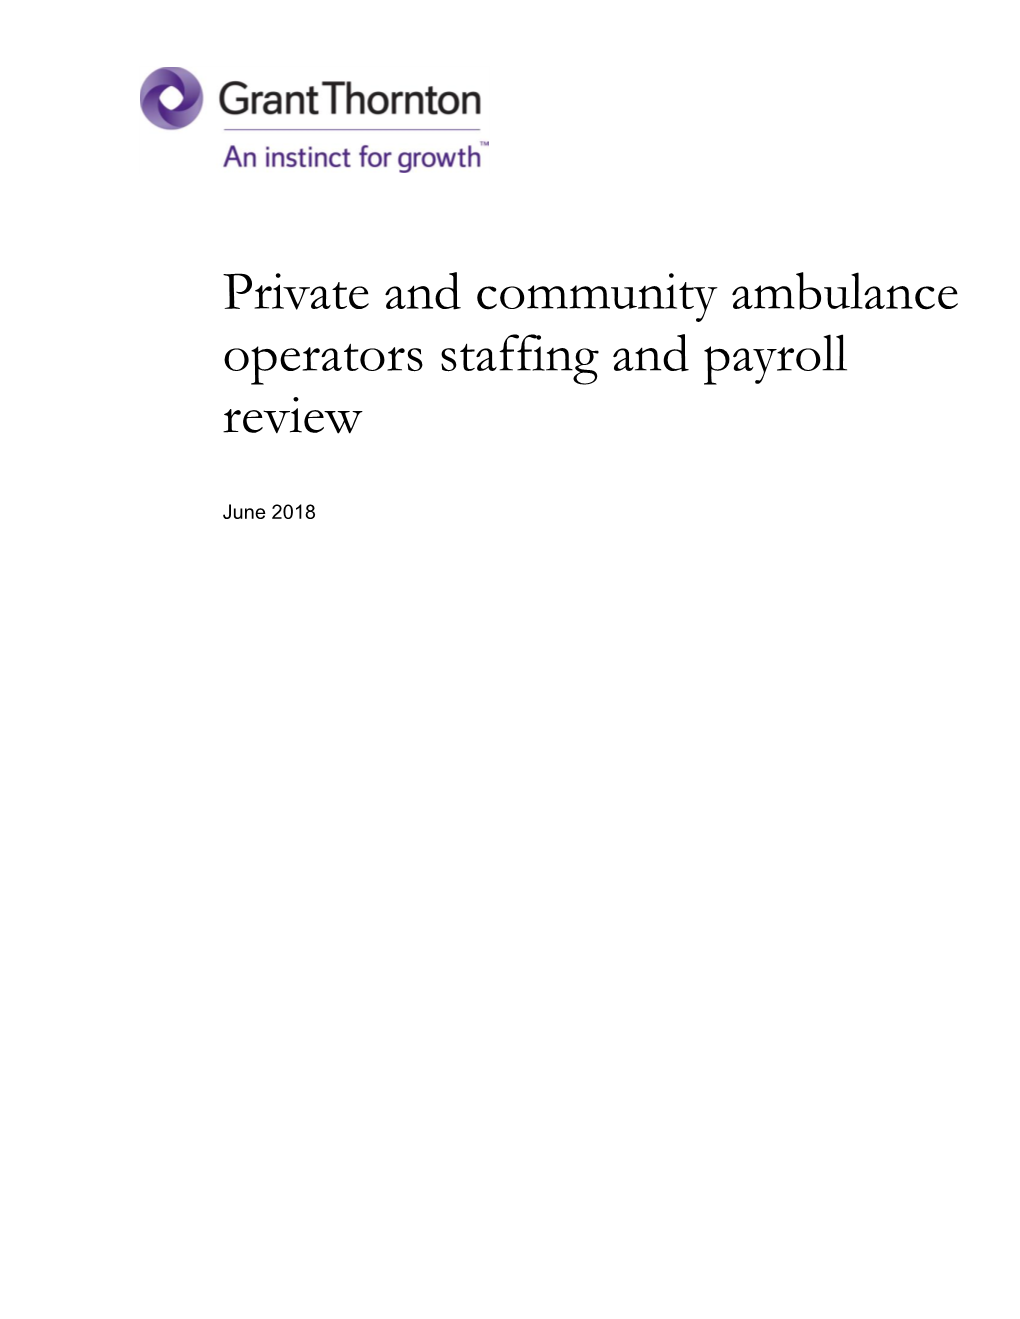 Private and Community Ambulance Operators Staffing and Payroll Review